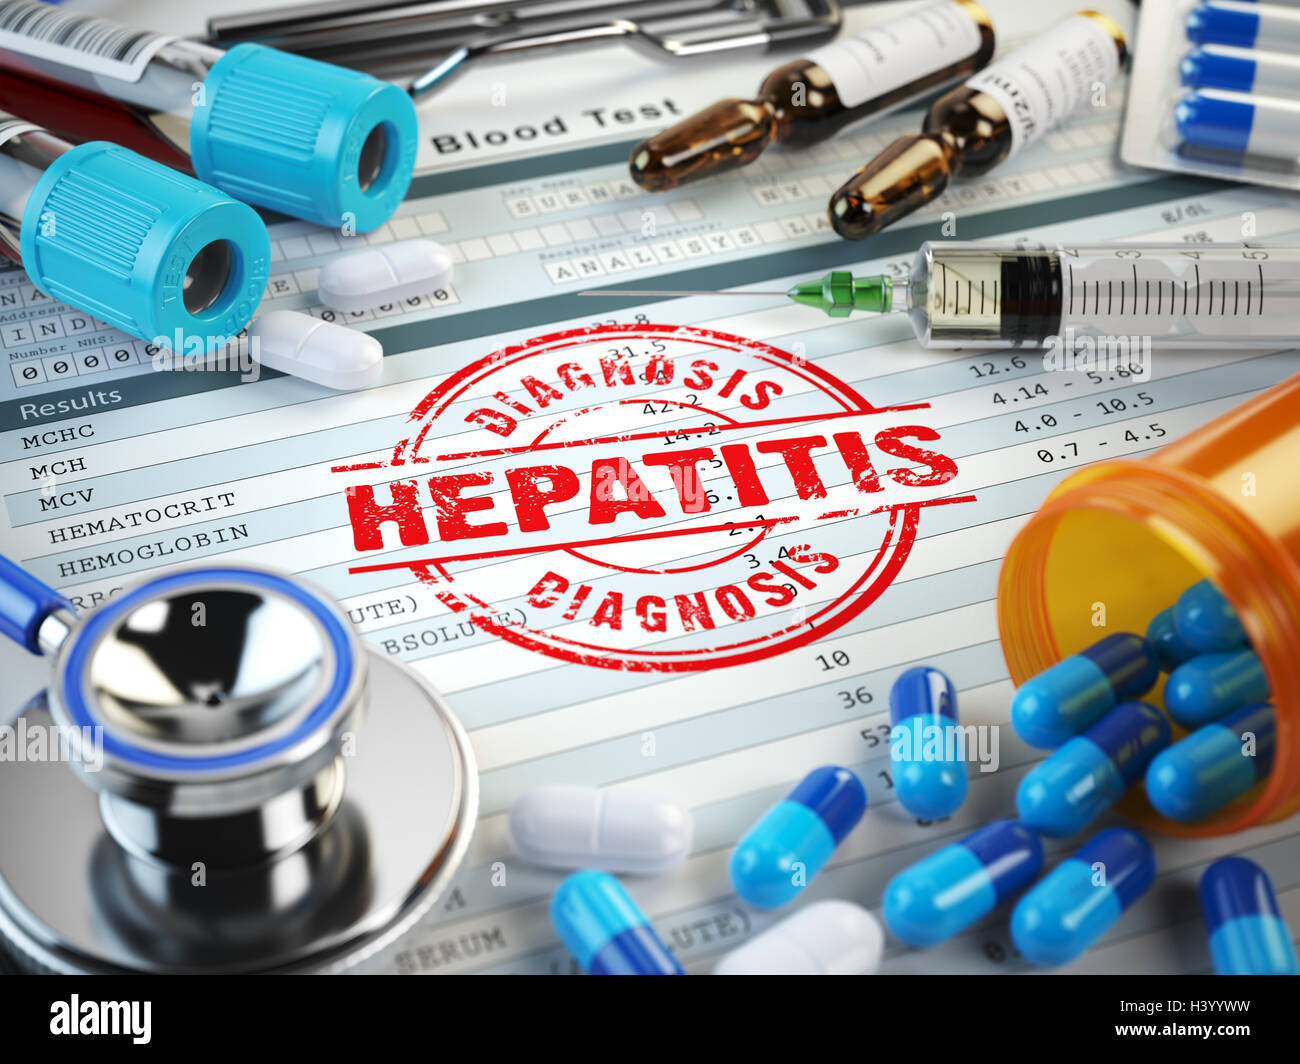 Hepatitis disease diagnosis. Stamp, stethoscope, syringe, blood test and pills on the clipboard with medical report. Stock Photo